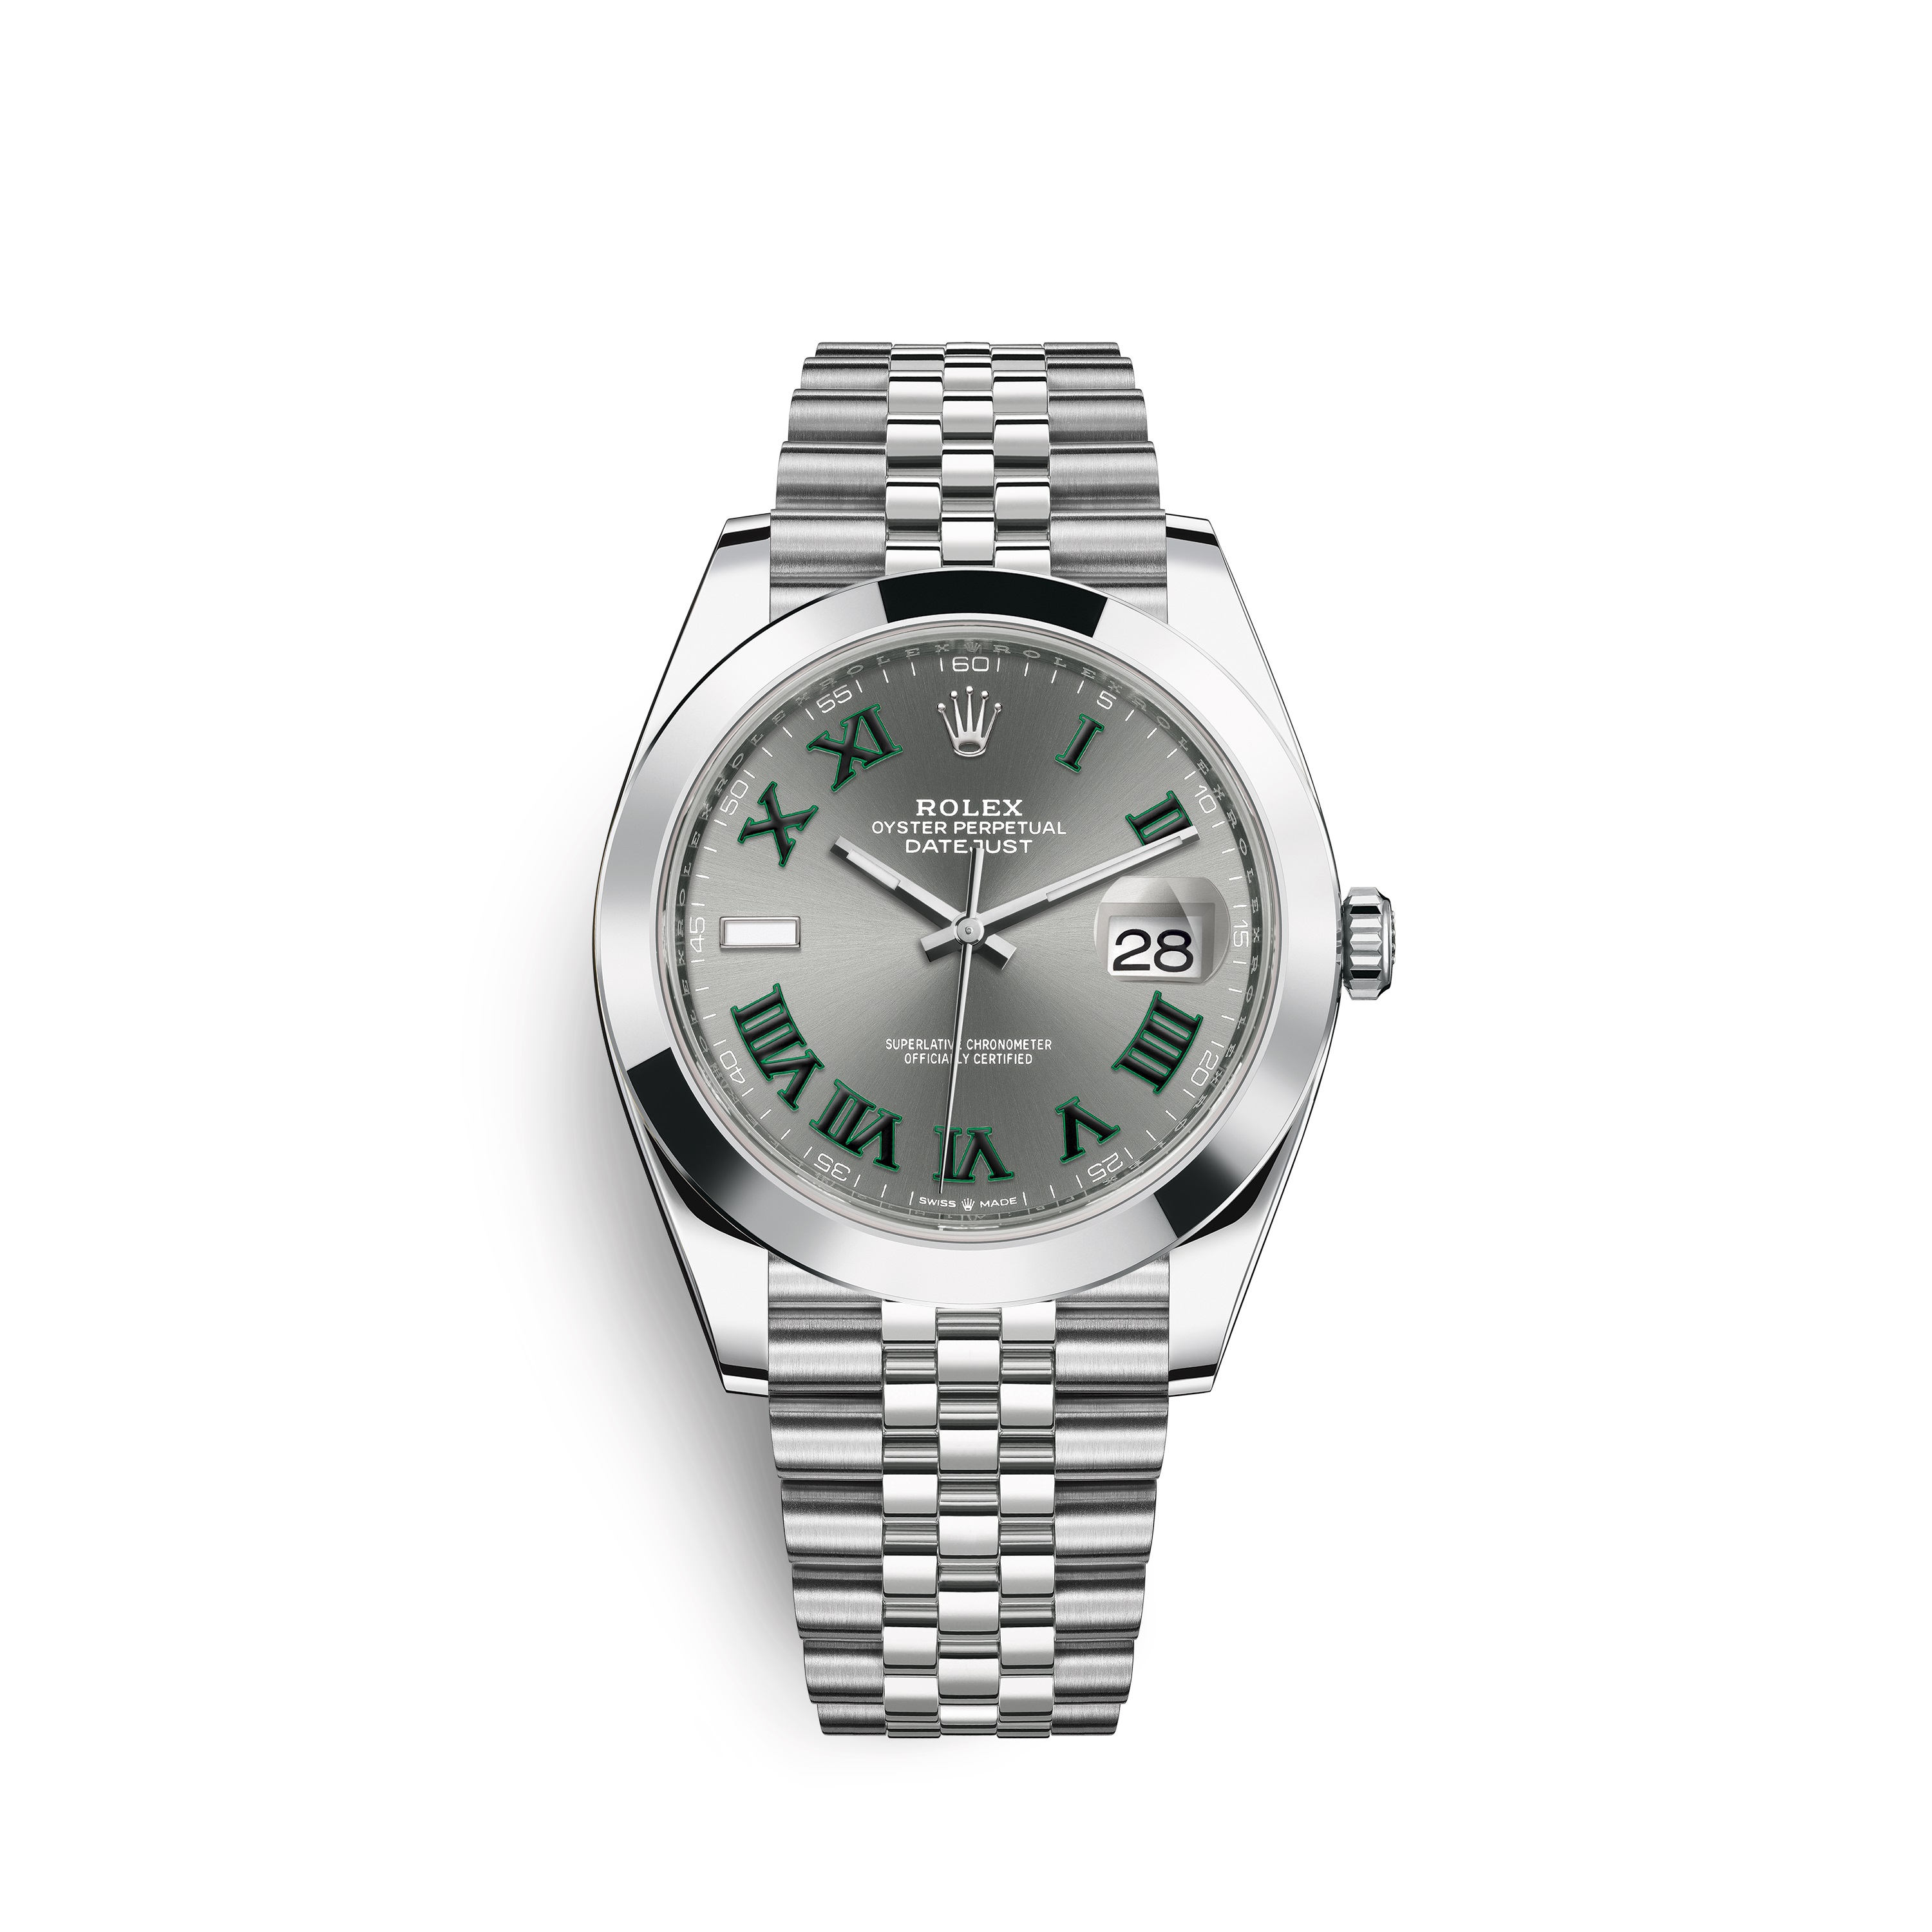 Datejust 41 126300 Stainless Steel Watch (Slate)